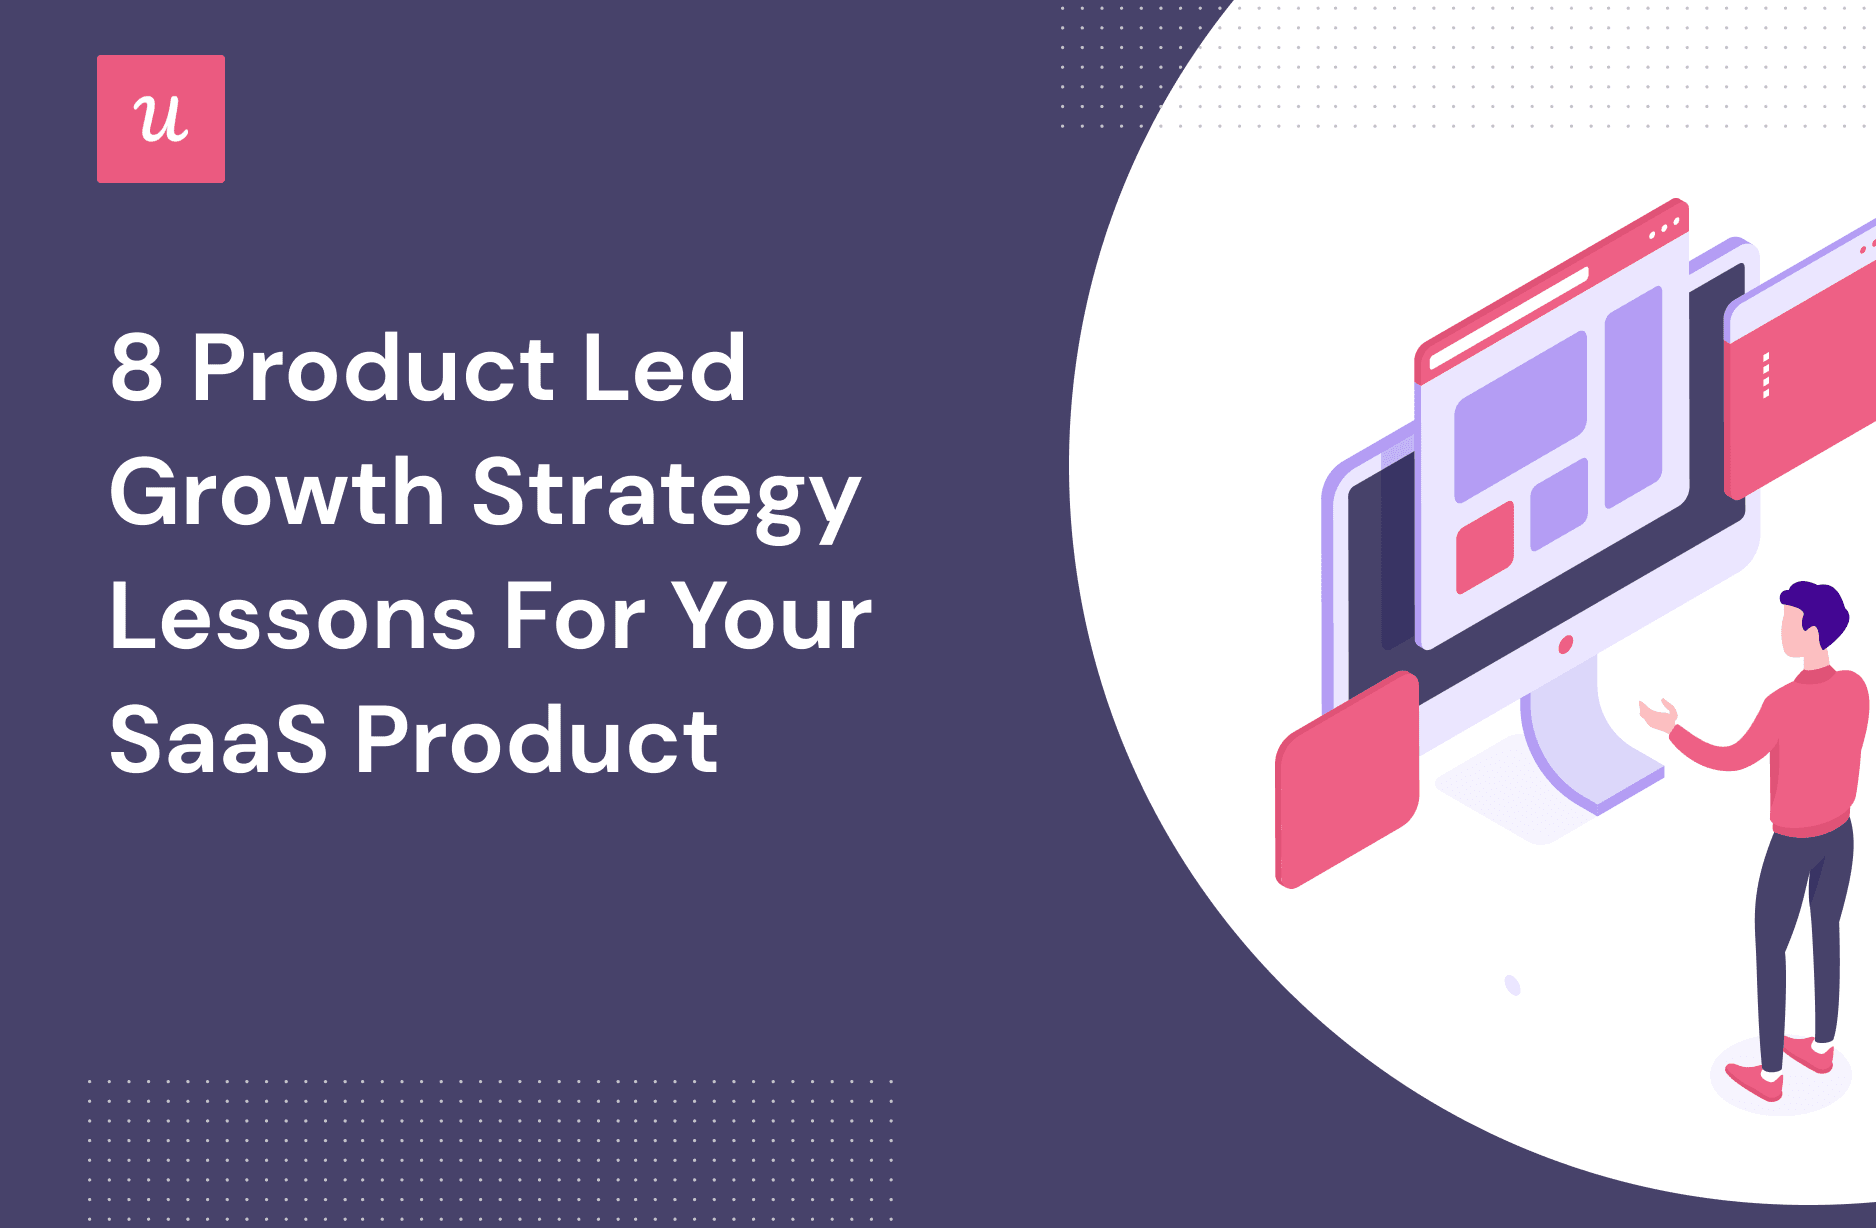 8 Product Led Growth Strategy Lessons For Your SaaS Product